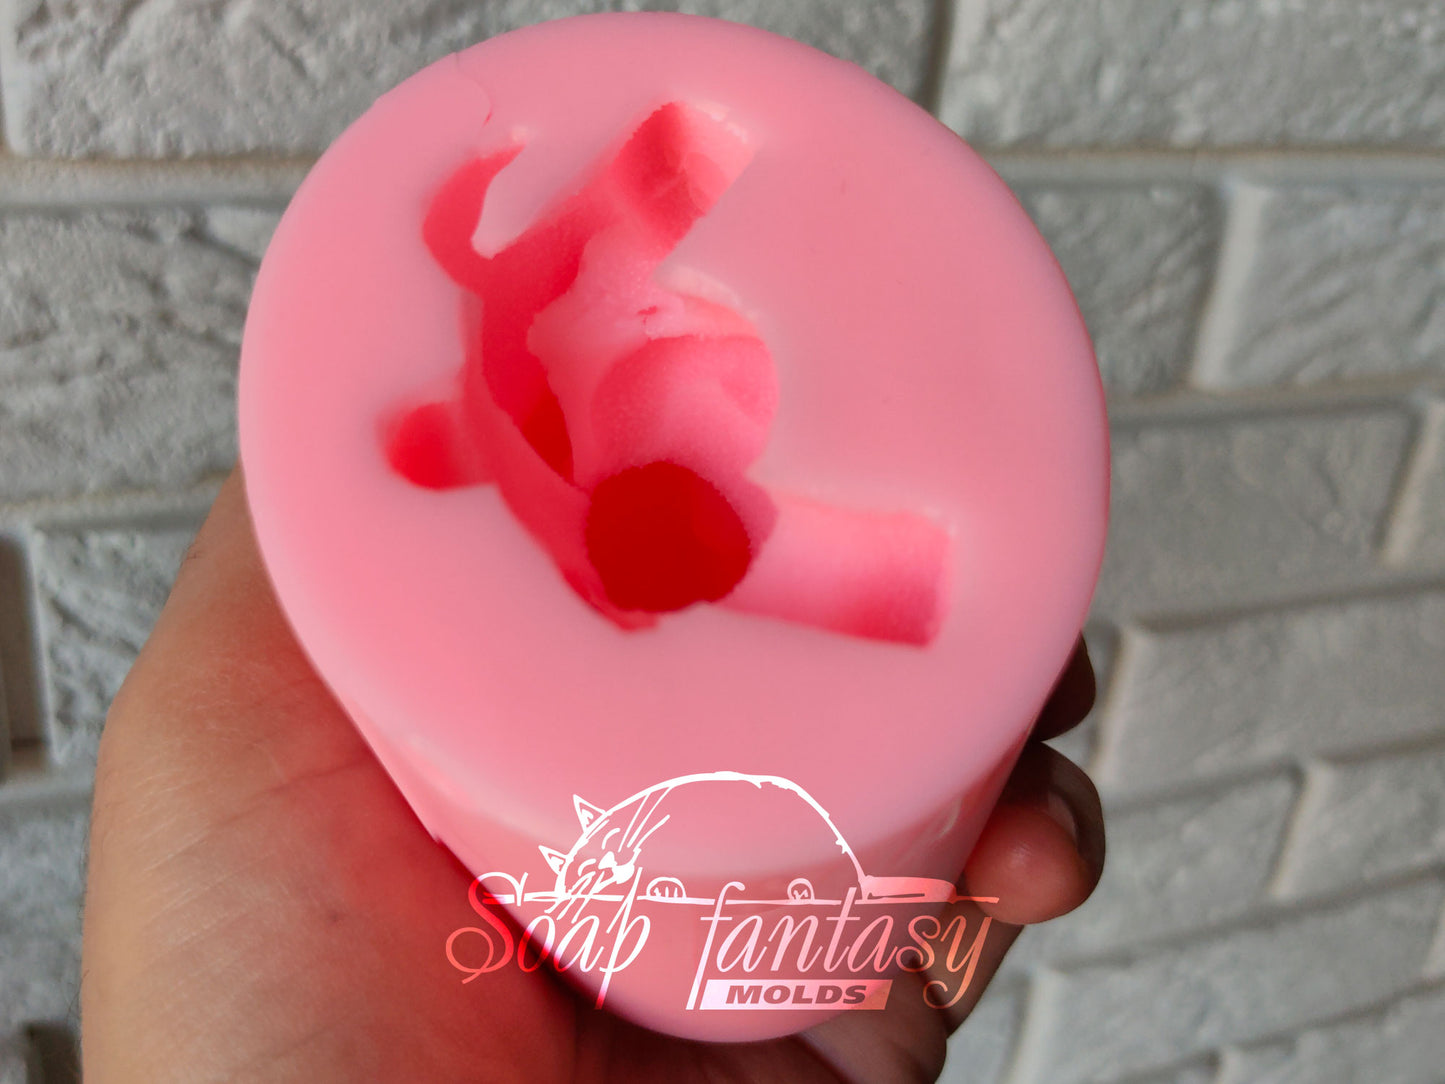 Bunny Pooh silicone mold for soap making